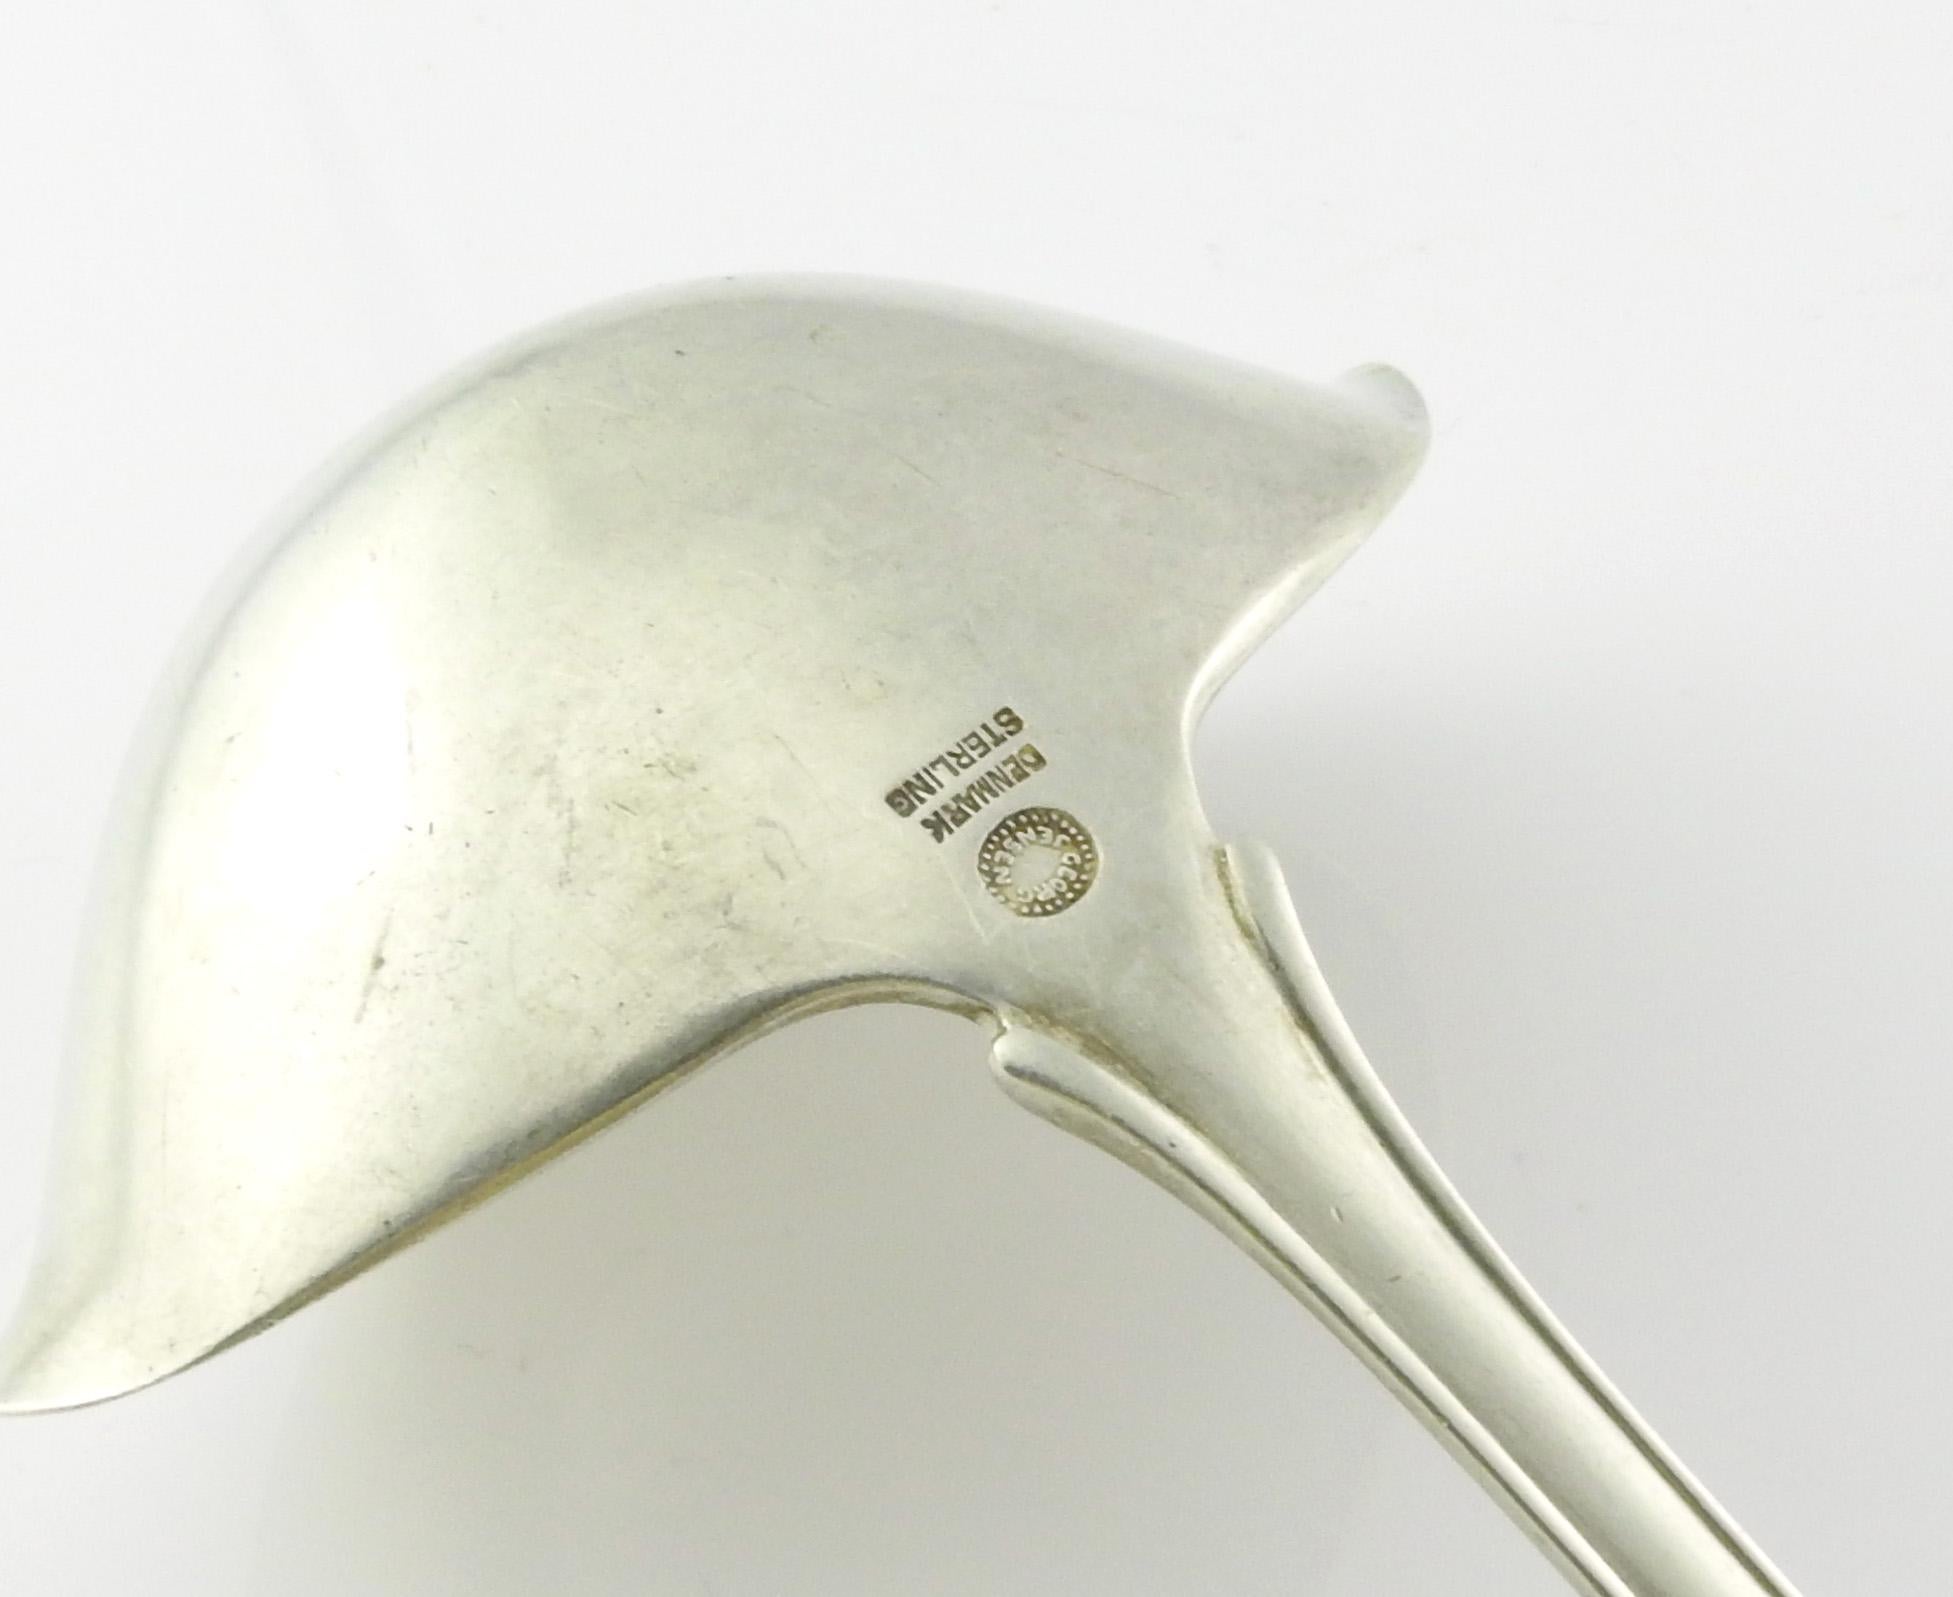 Georg Jensen Denmark 1913 Lily of the Valley Solid Gravy Ladle 1